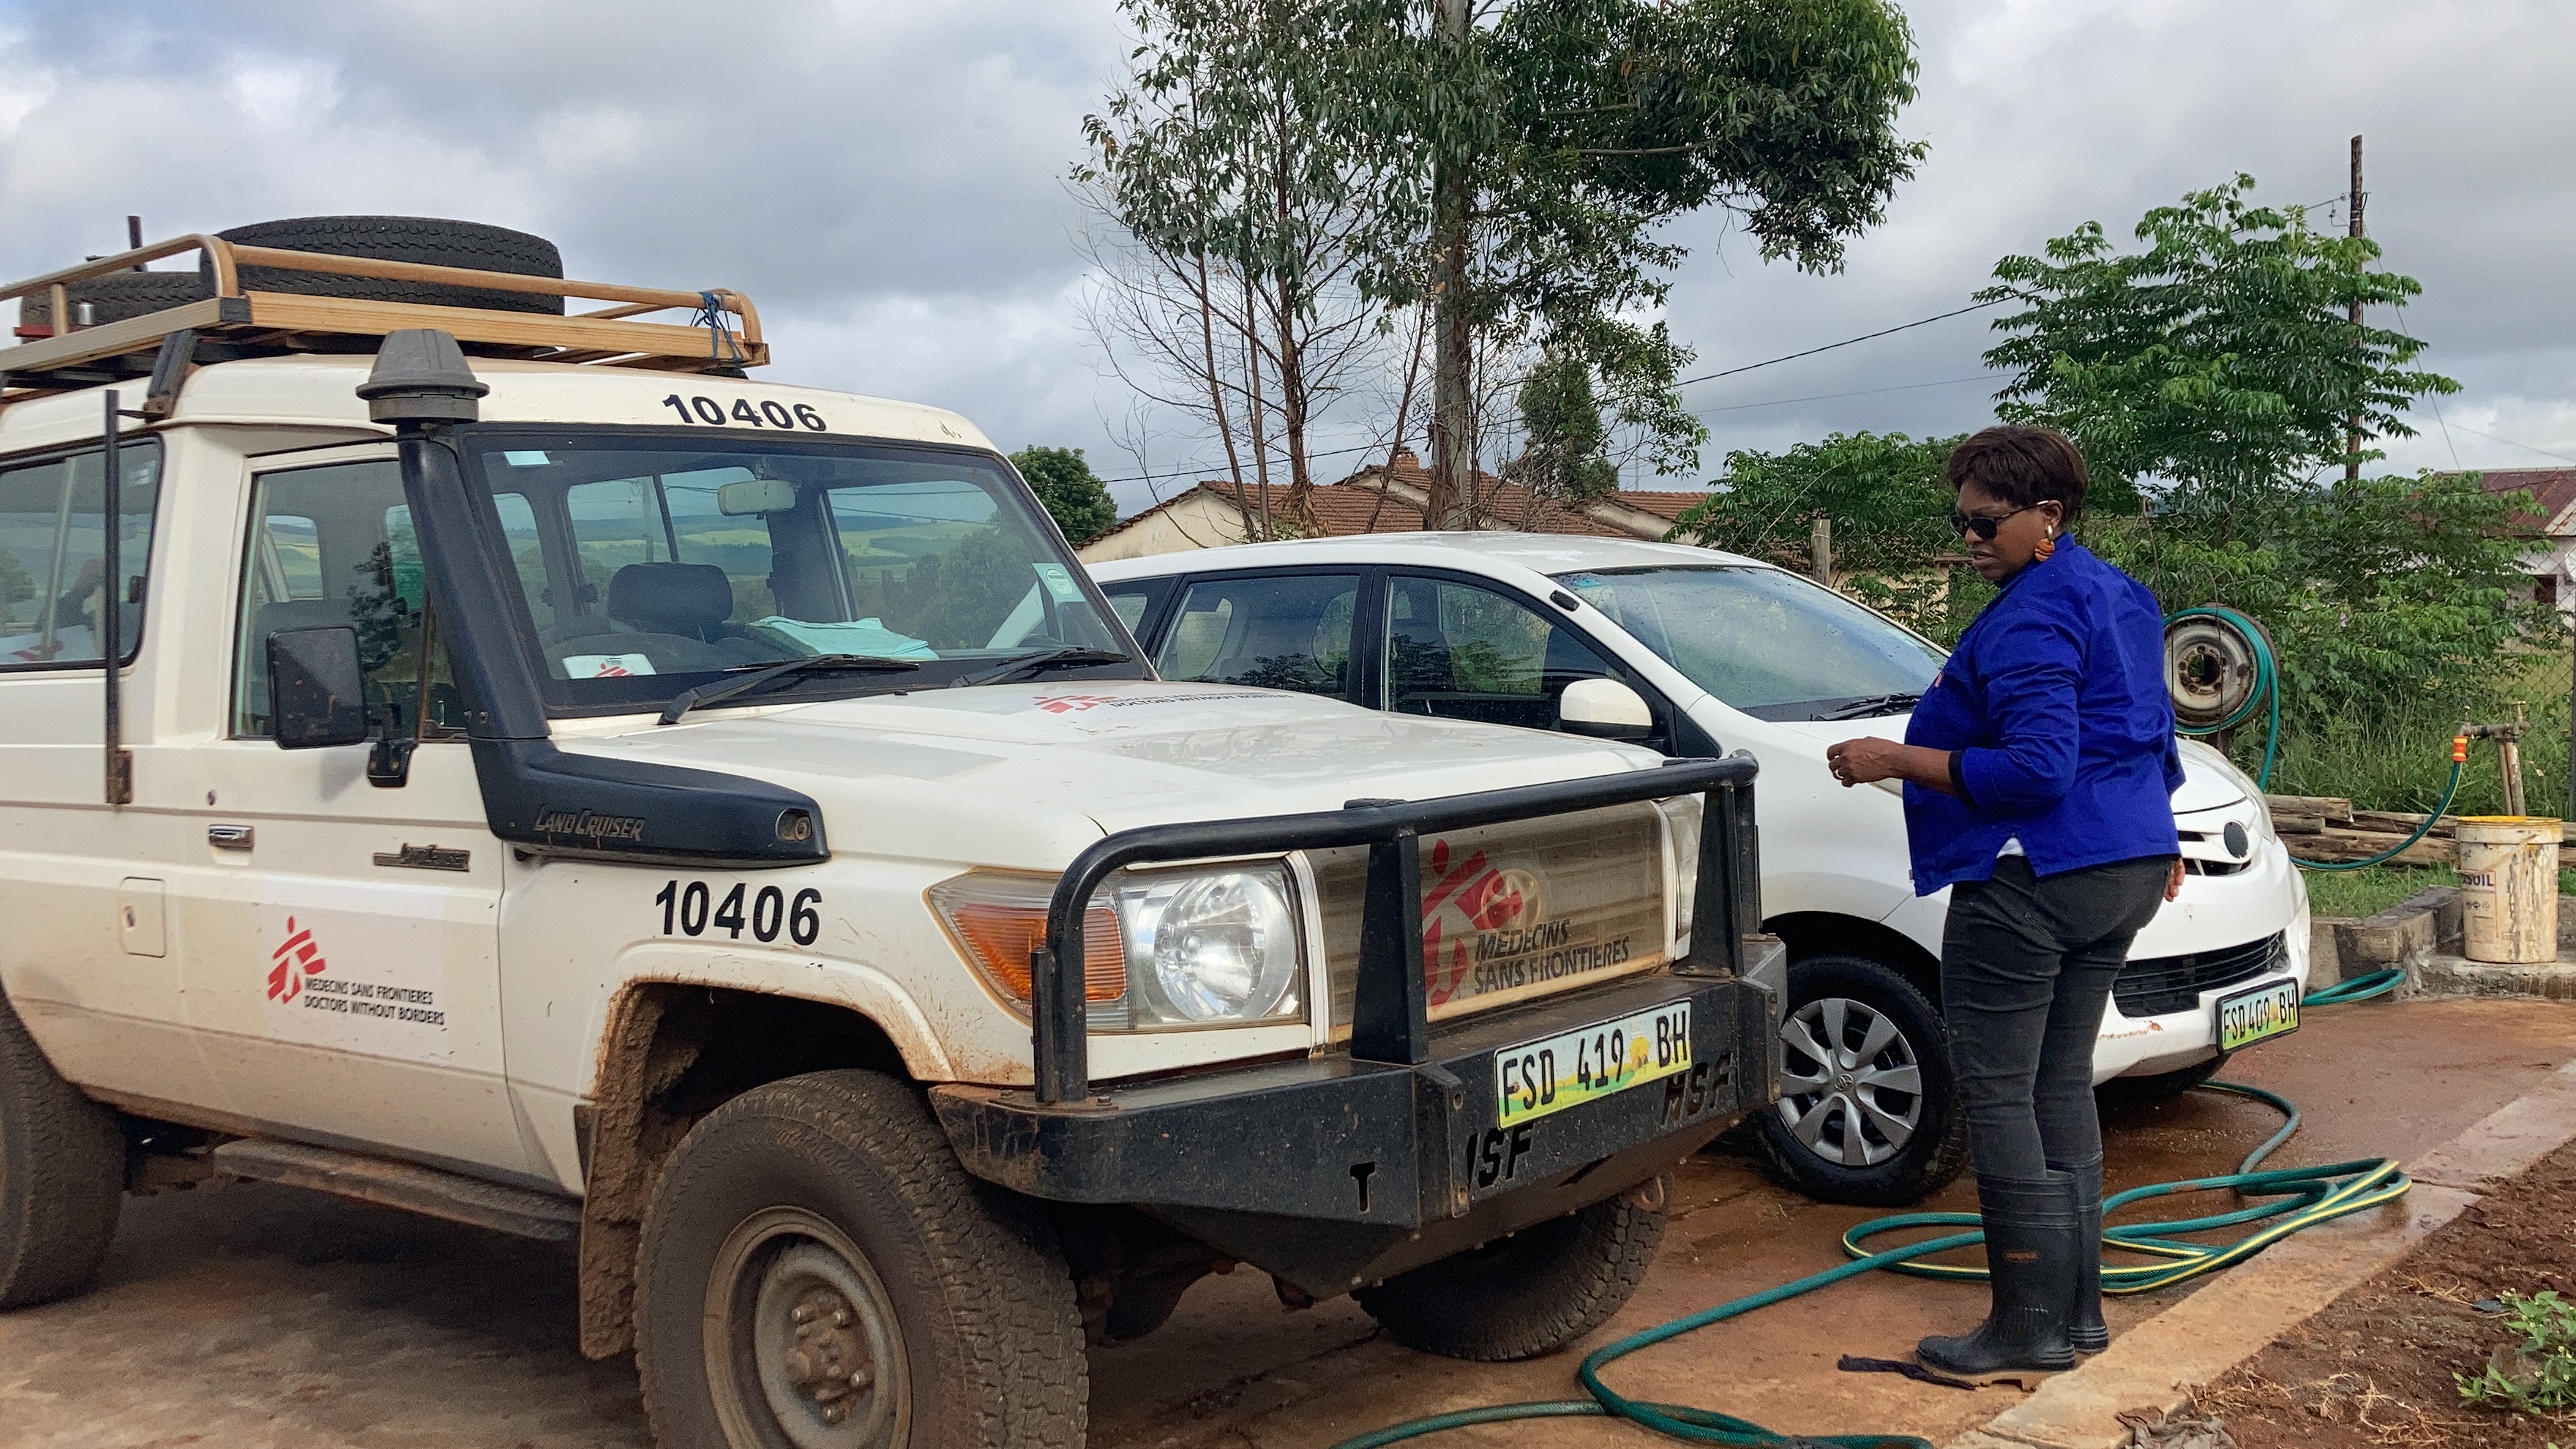 fikile_ngwenya_is_confident_driving_different_vehicles_in_her_role_as_field_driver_with_msf_in_eswatini._c_makhosazana_xaba.jpg